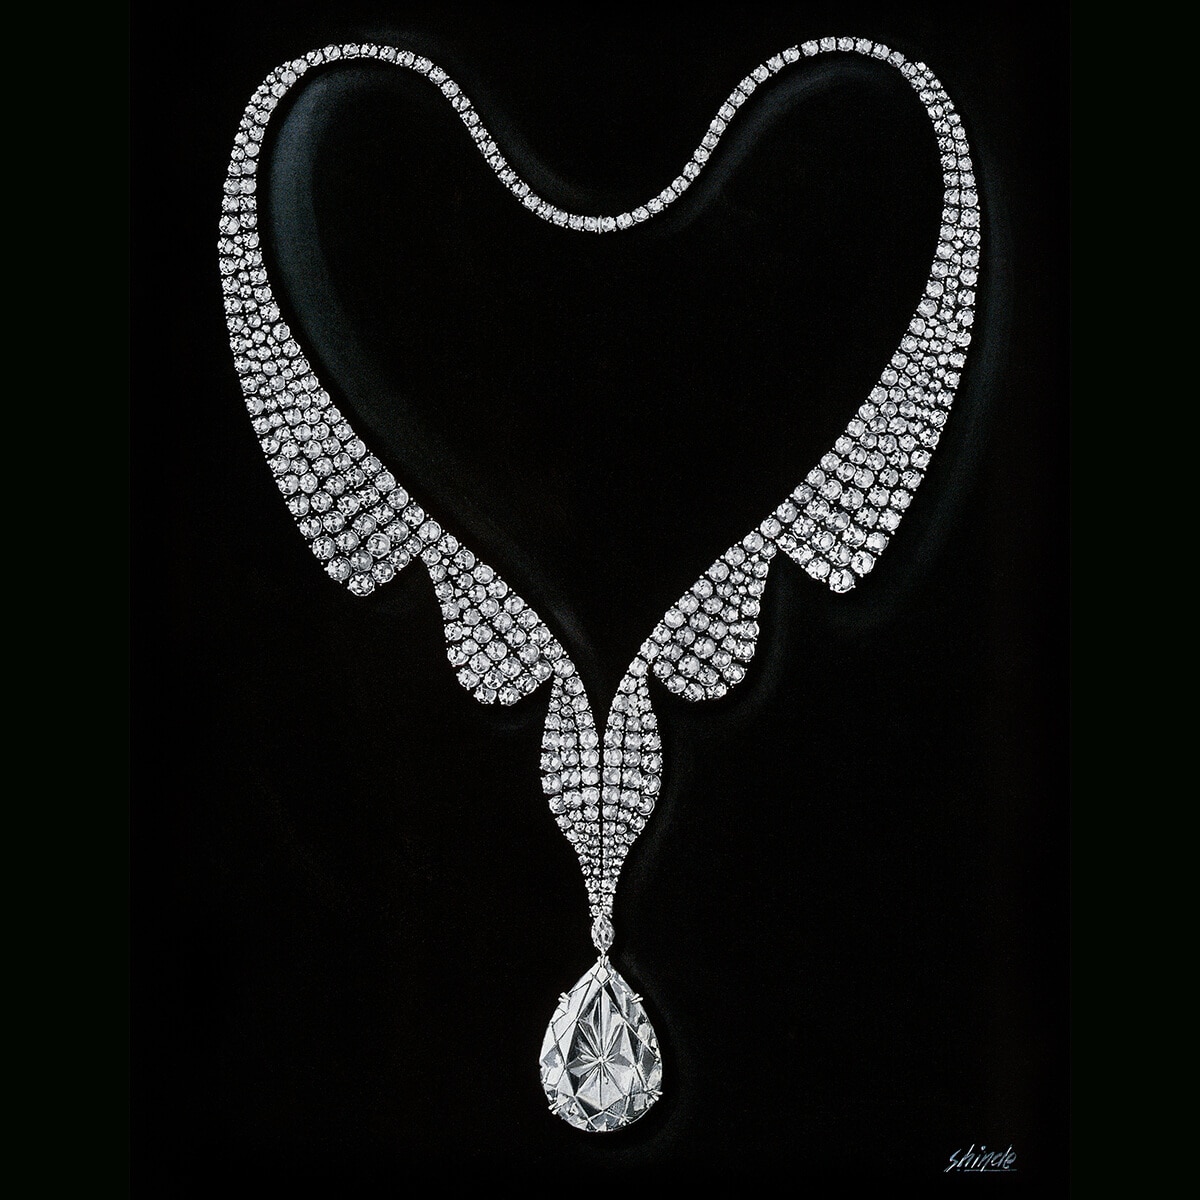 Sketch of a necklace featuring aflawless 69.42 carat pear-shaped diamond that would be purchased by Richard Burton for Elizabeth Taylor and named the Taylor-Burton Diamond